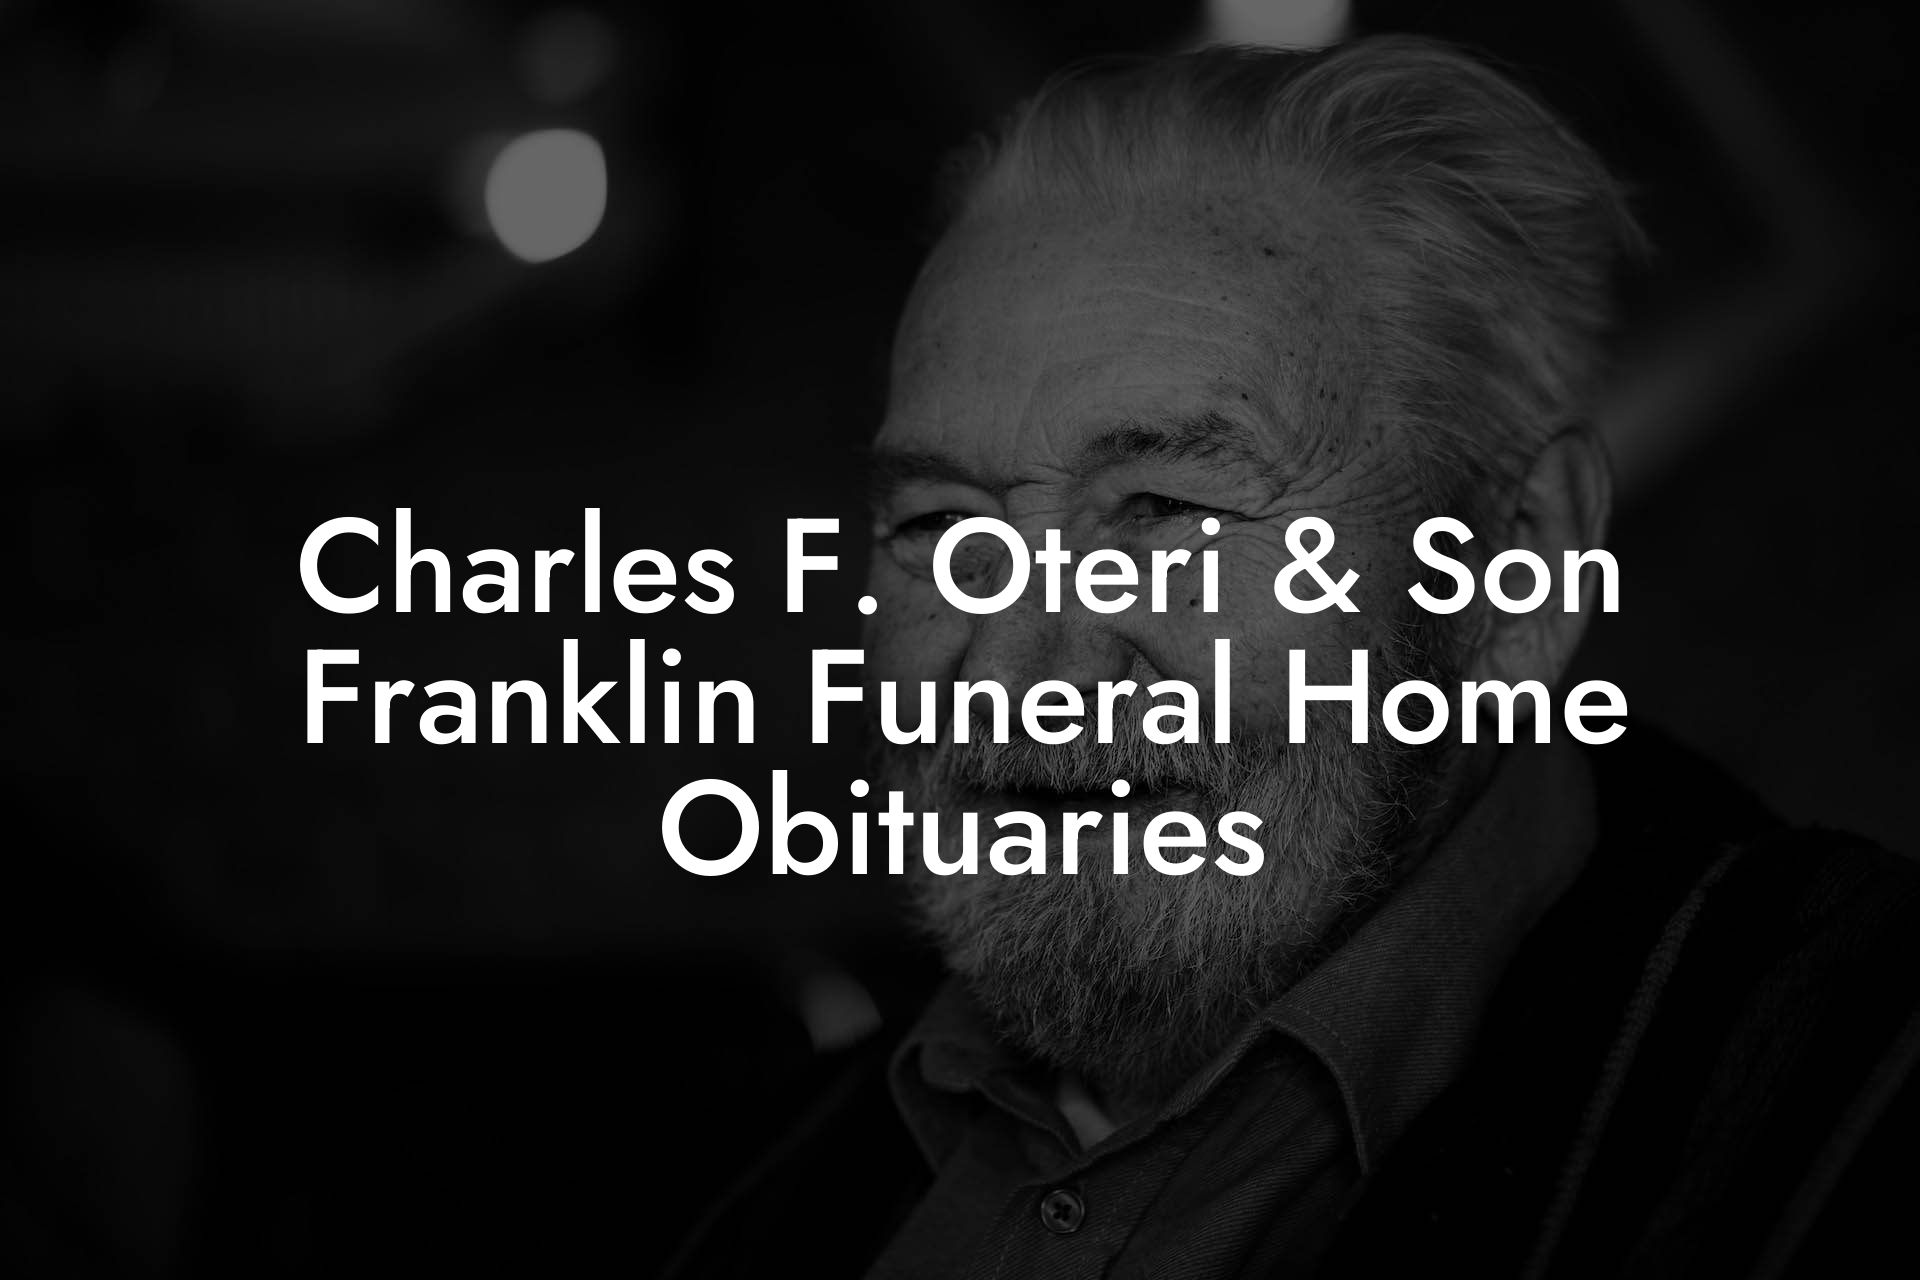 Charles F. Oteri & Son Franklin Funeral Home Obituaries